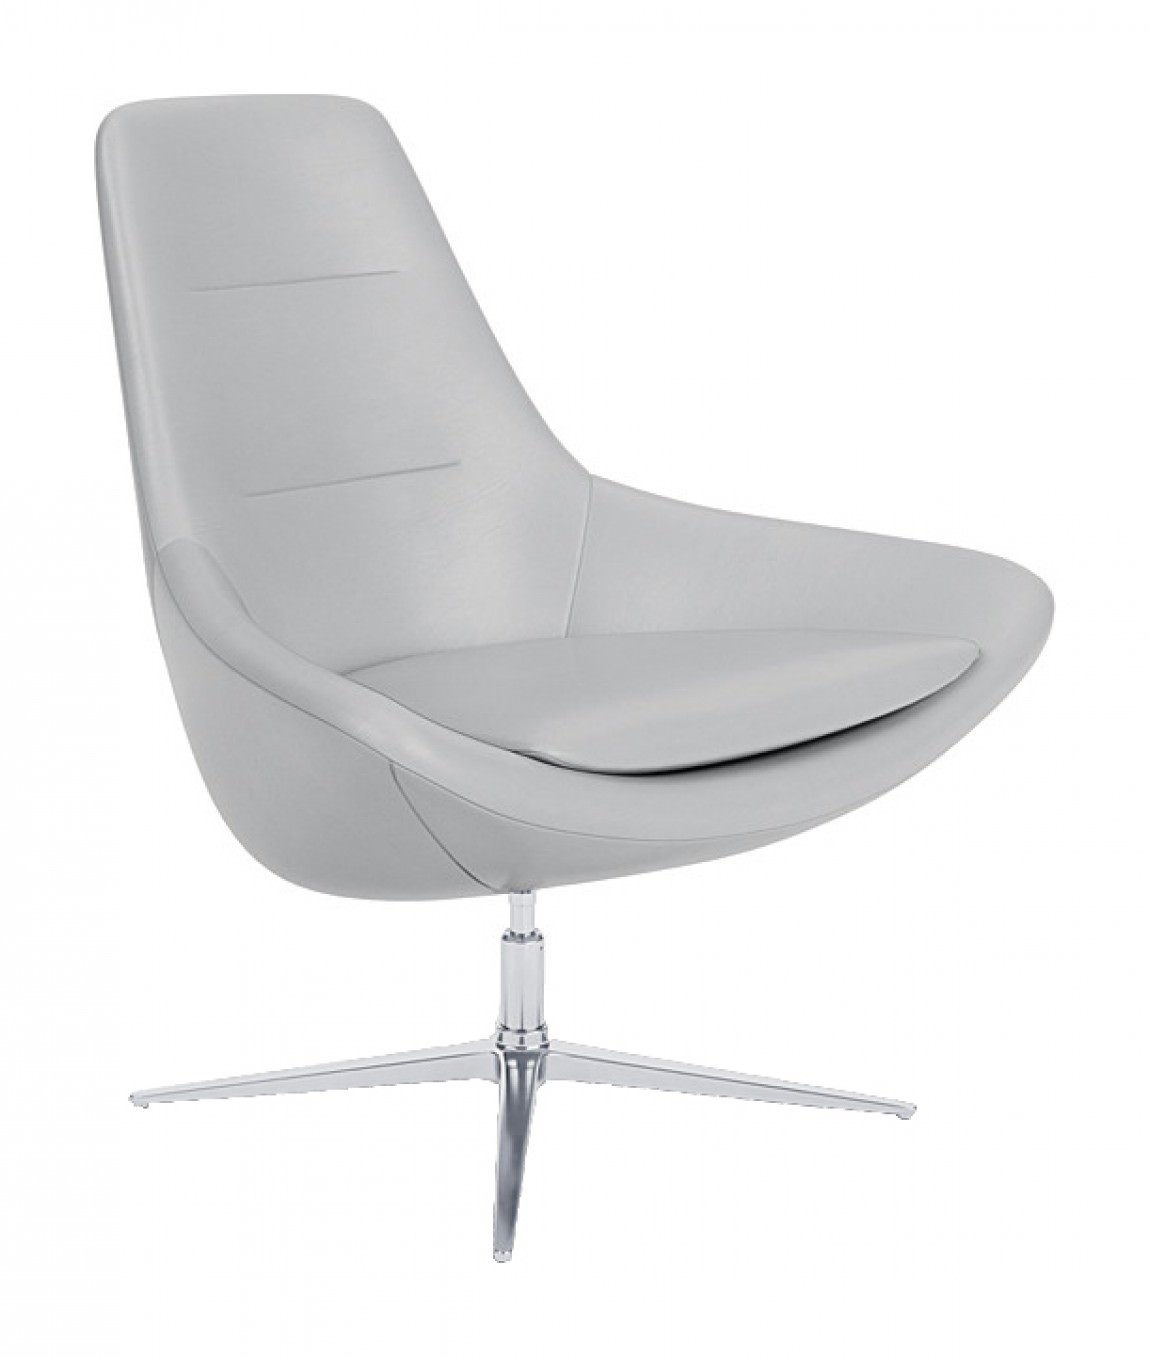 Guest Swivel Chair With Tilt And Lean